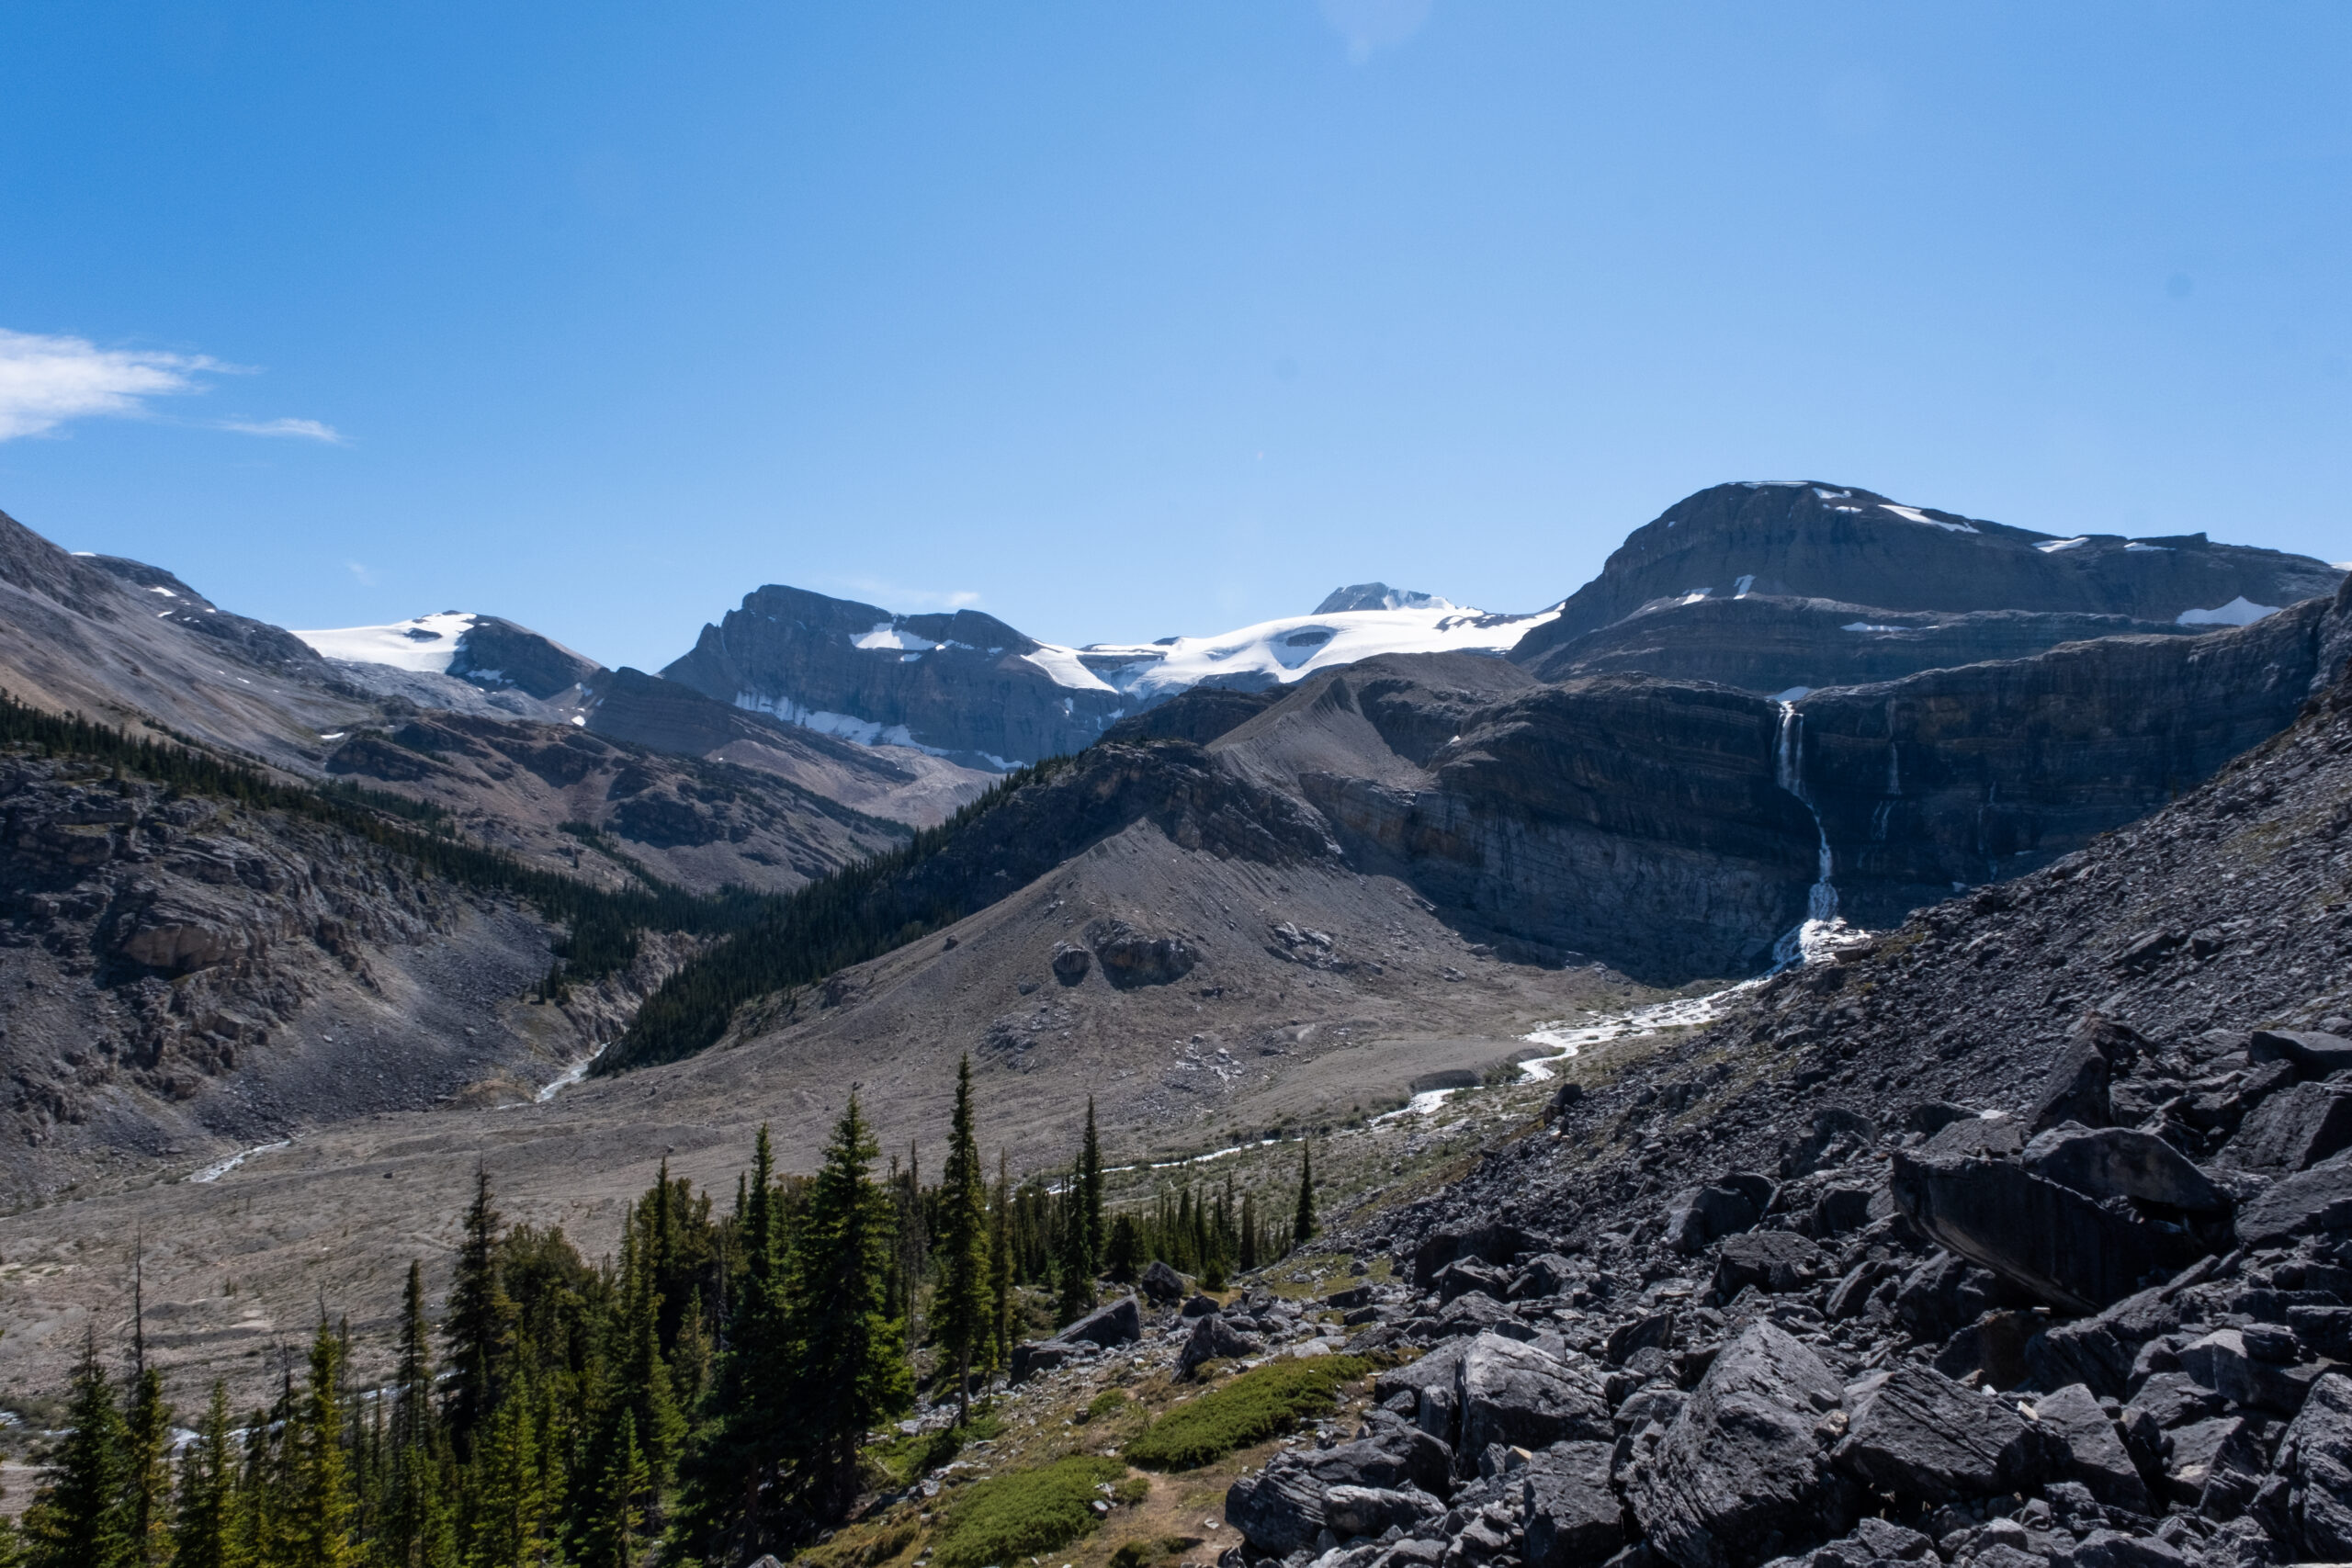 Take a look back at Bow Glacier Falls as you start to ascend